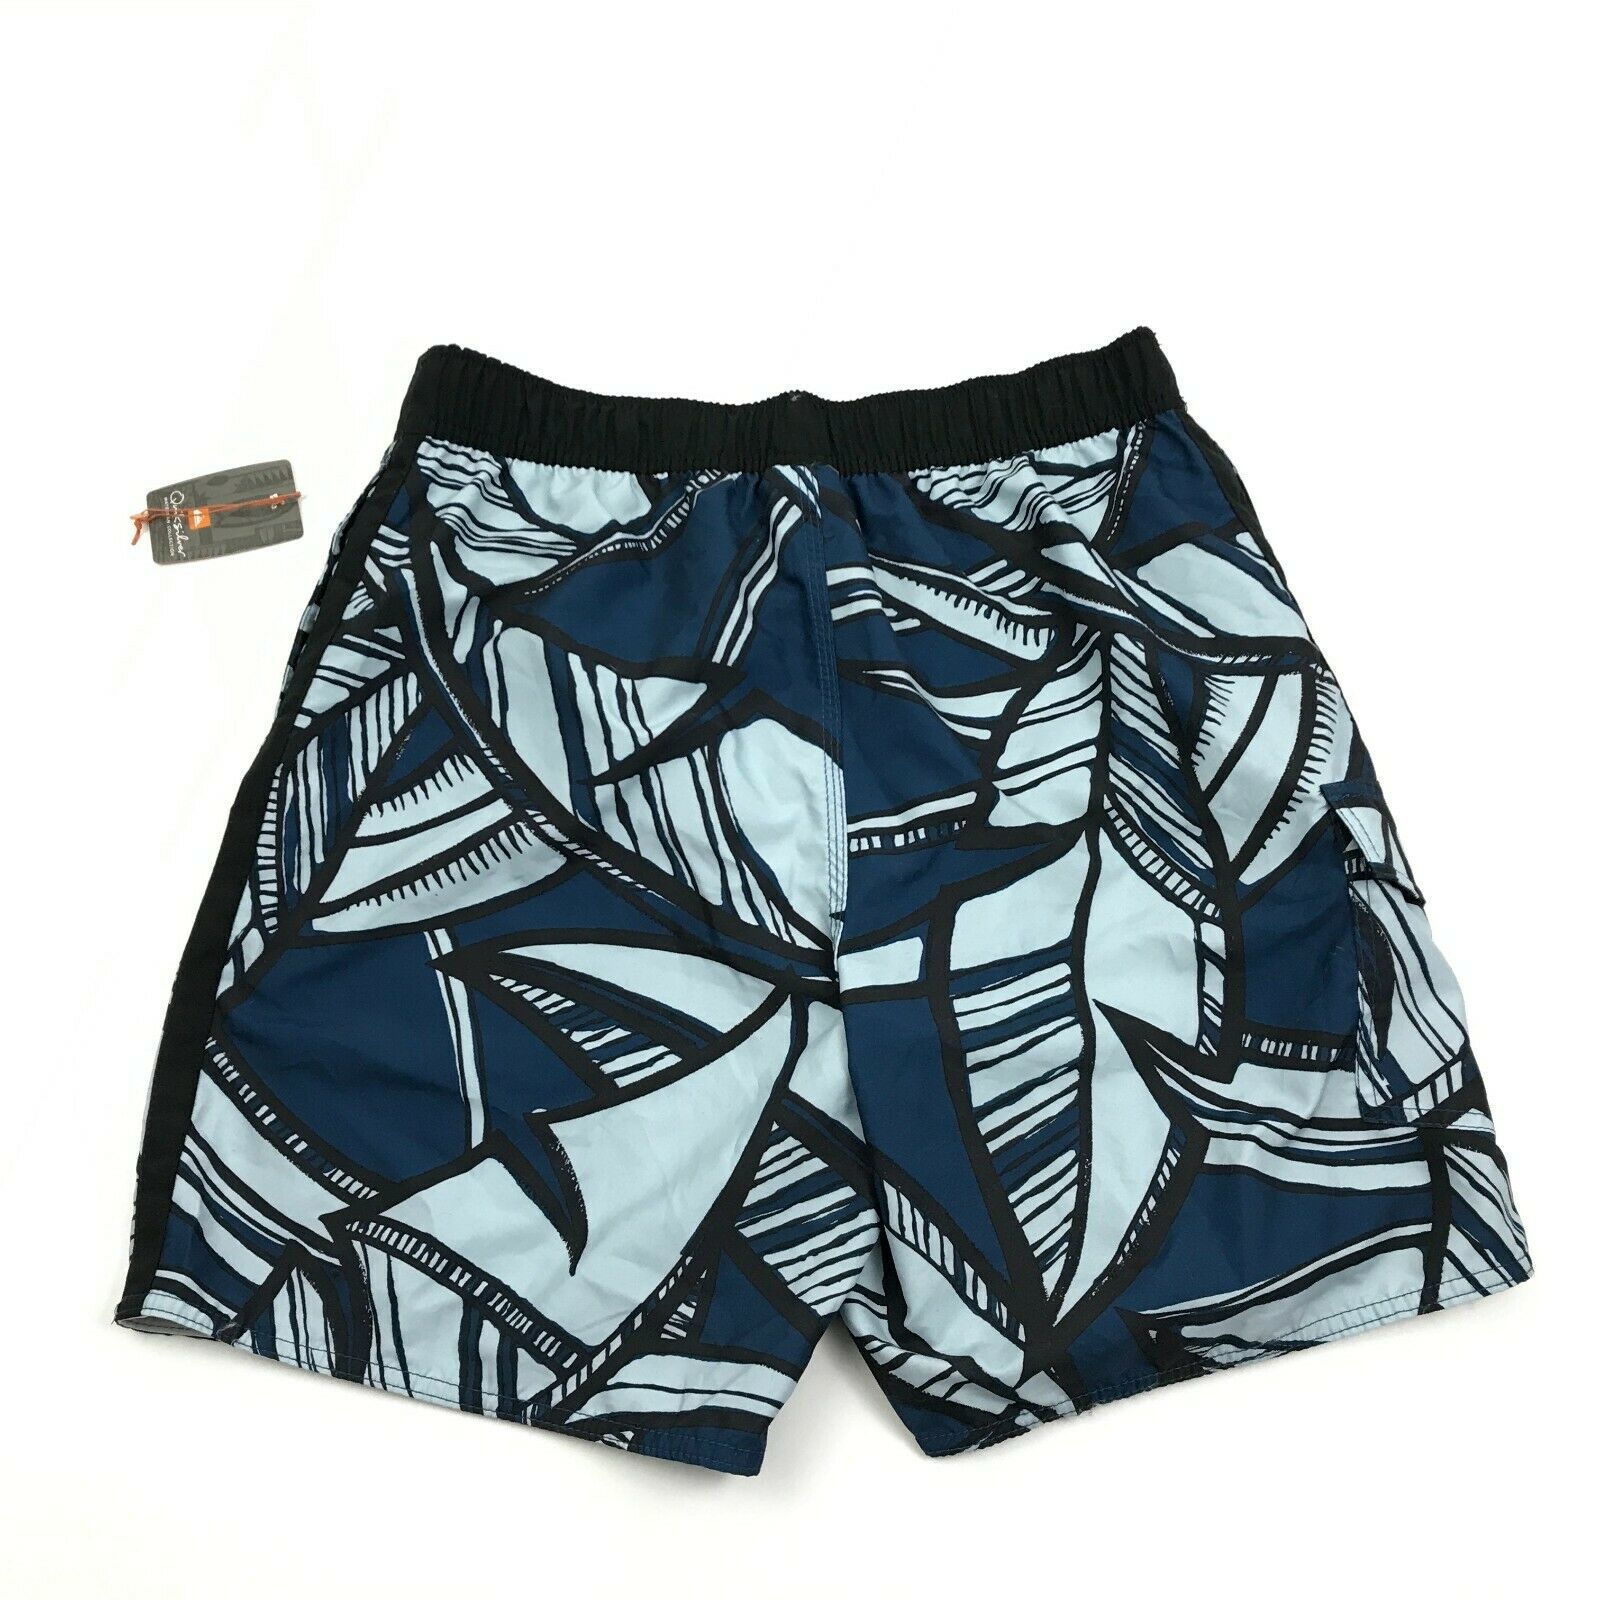 NEW Quicksilver Waterman Collection Board Shorts Size Large Blue Swim ...